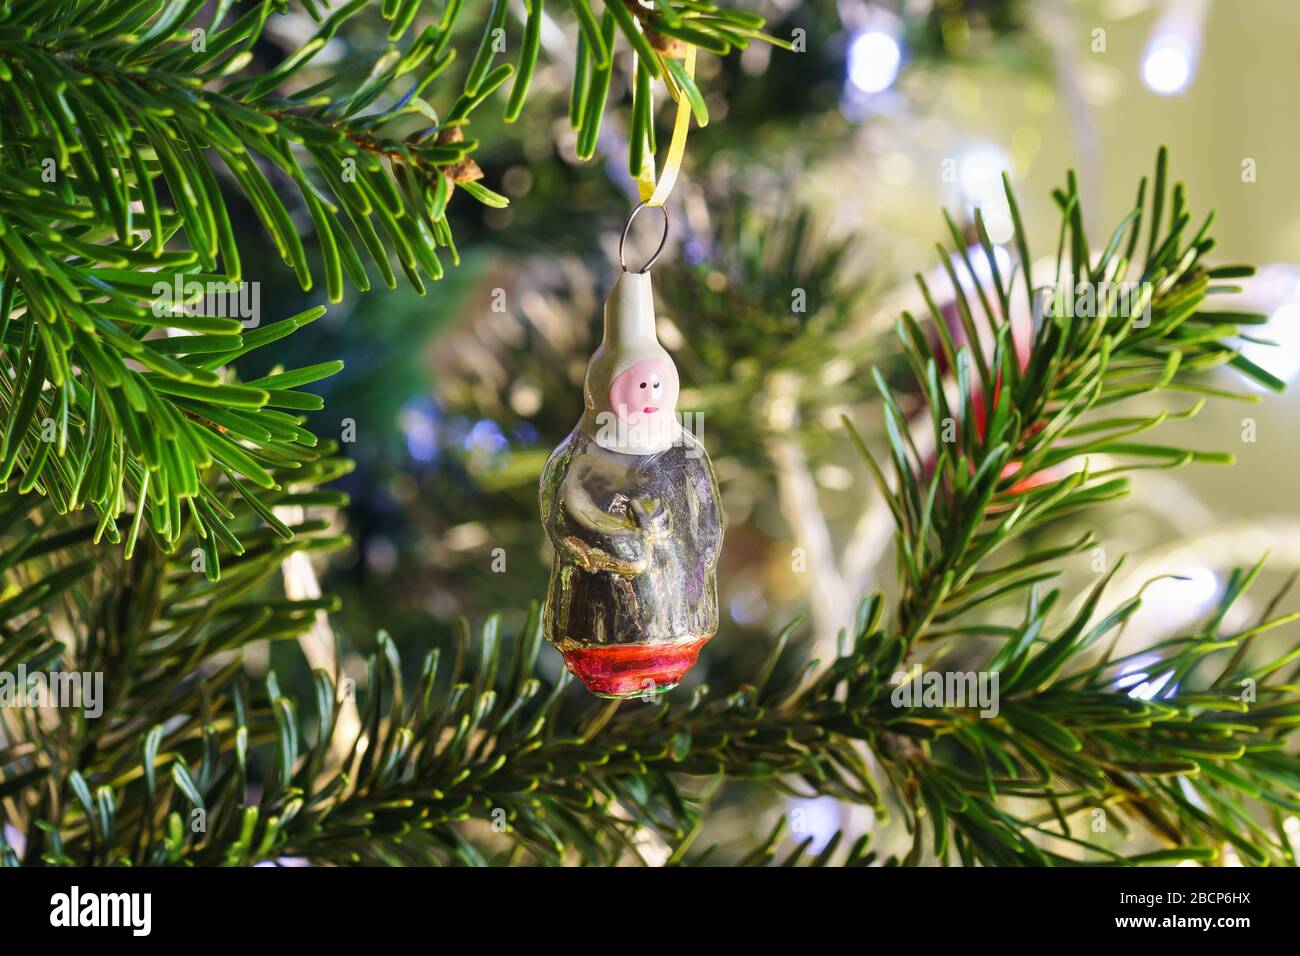 Glass village woman-new years Soviet Christmas tree toy hanging on a branch of green fir Stock Photo